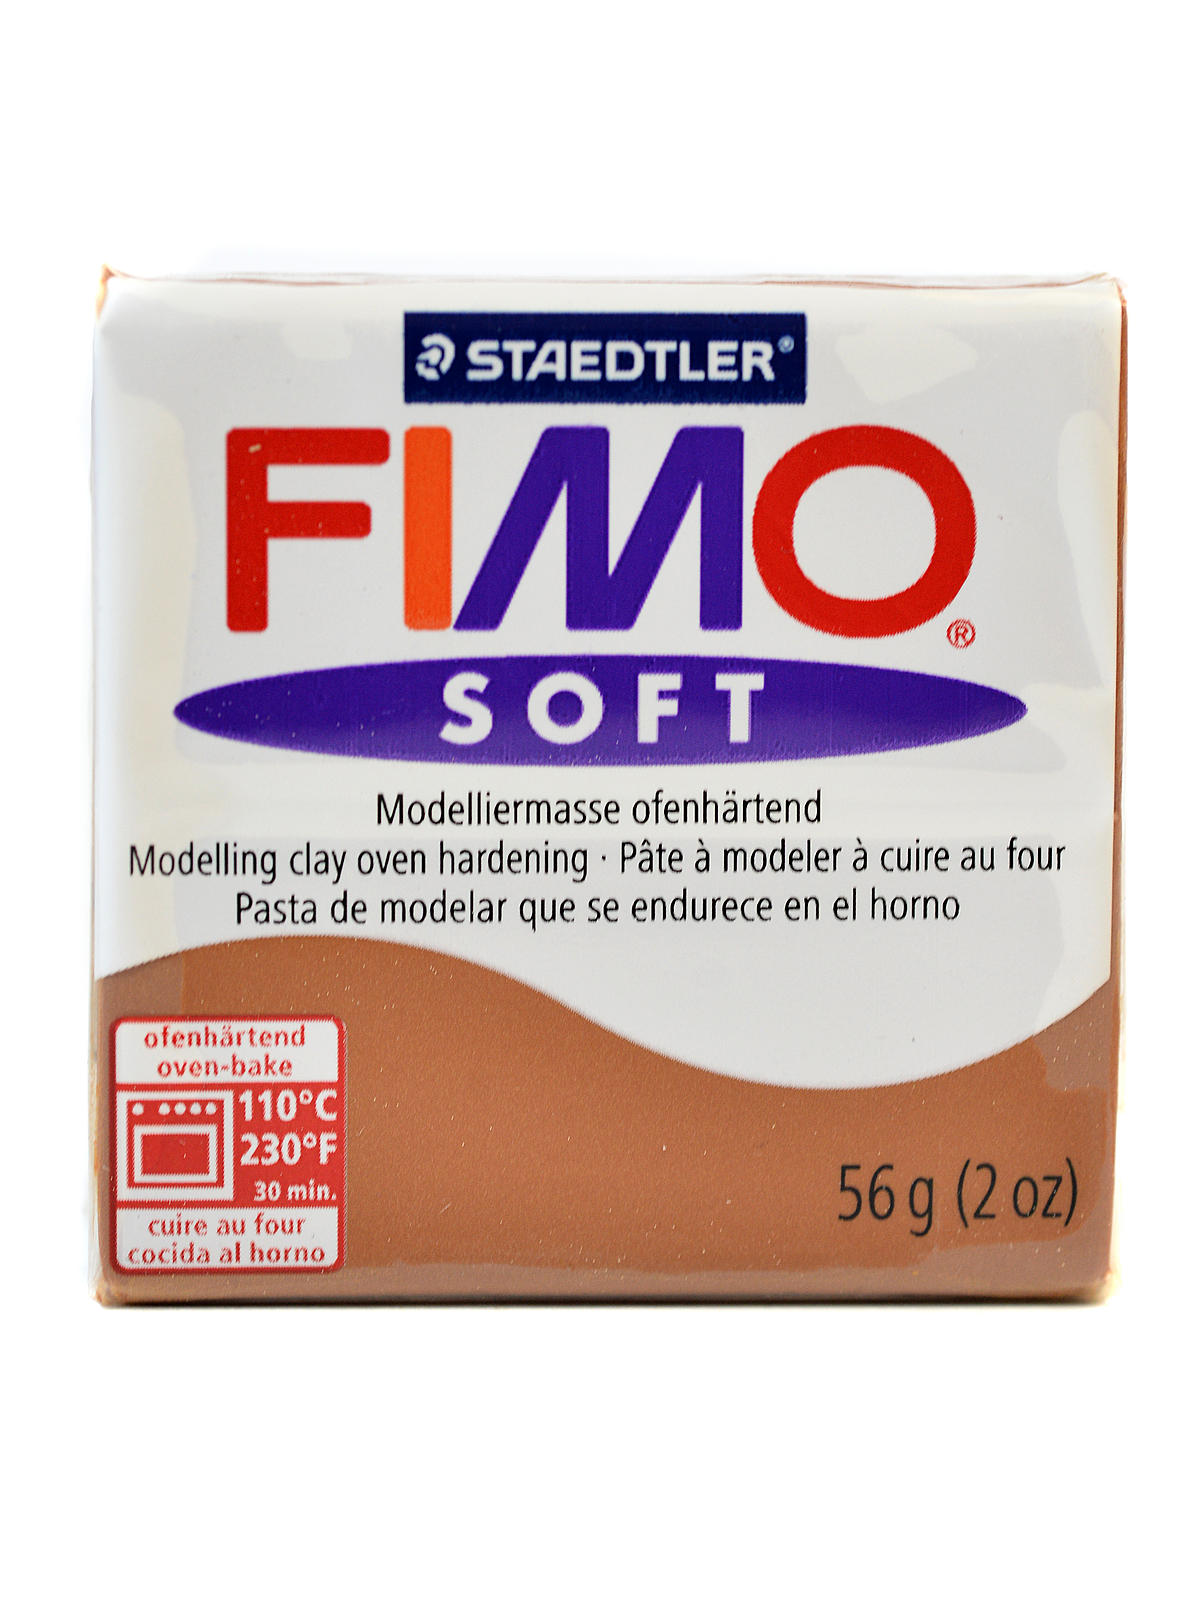 Oven Bake Modelling Clay Moulding Polymer Block Colour 56g Staedtler Fimo Soft Cherry Red 26 1 Pack 